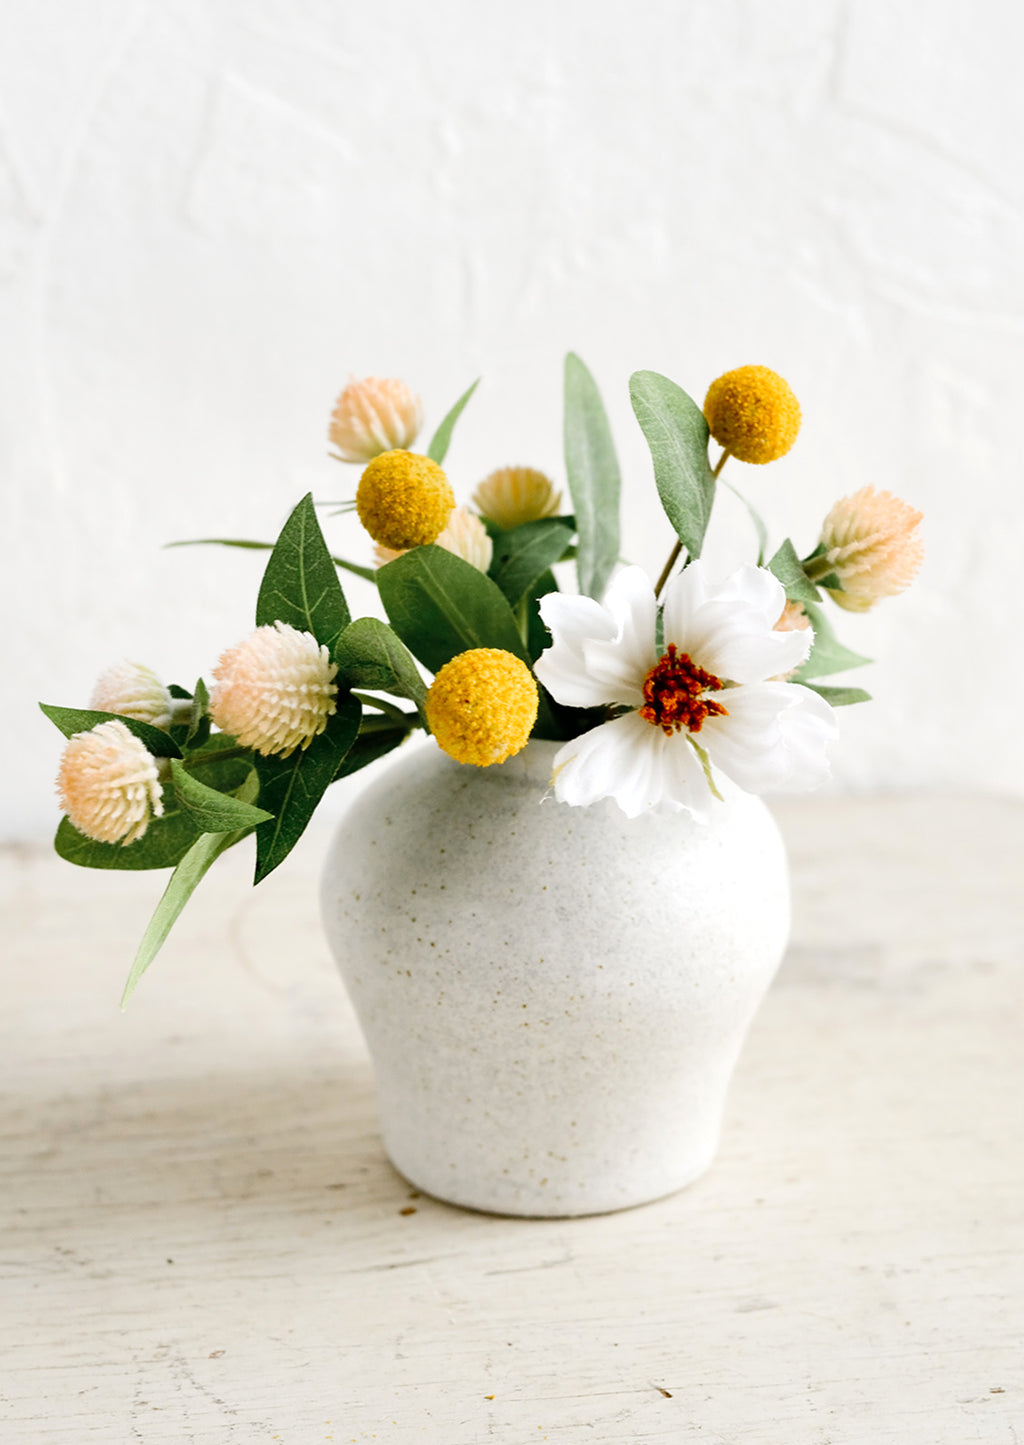 2: A small white ceramic vase in curvy shape with colorful flowers.